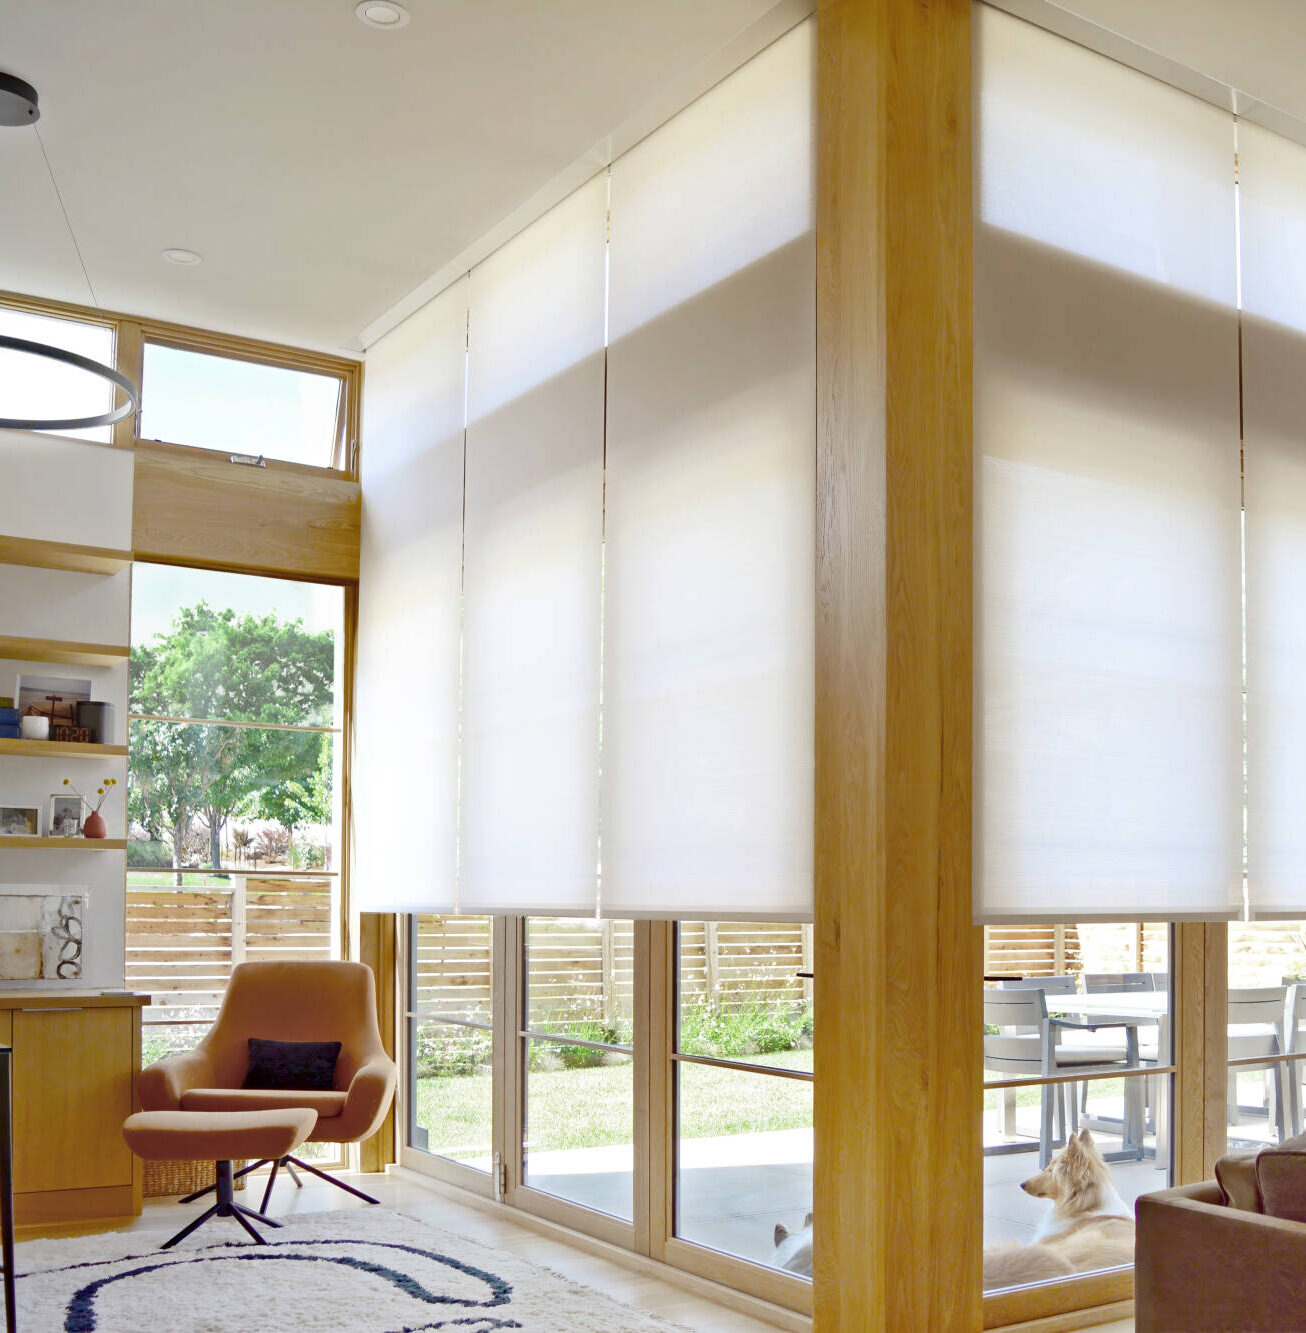 Insolroll Elements Decorative Roller Shades in translucent fabric